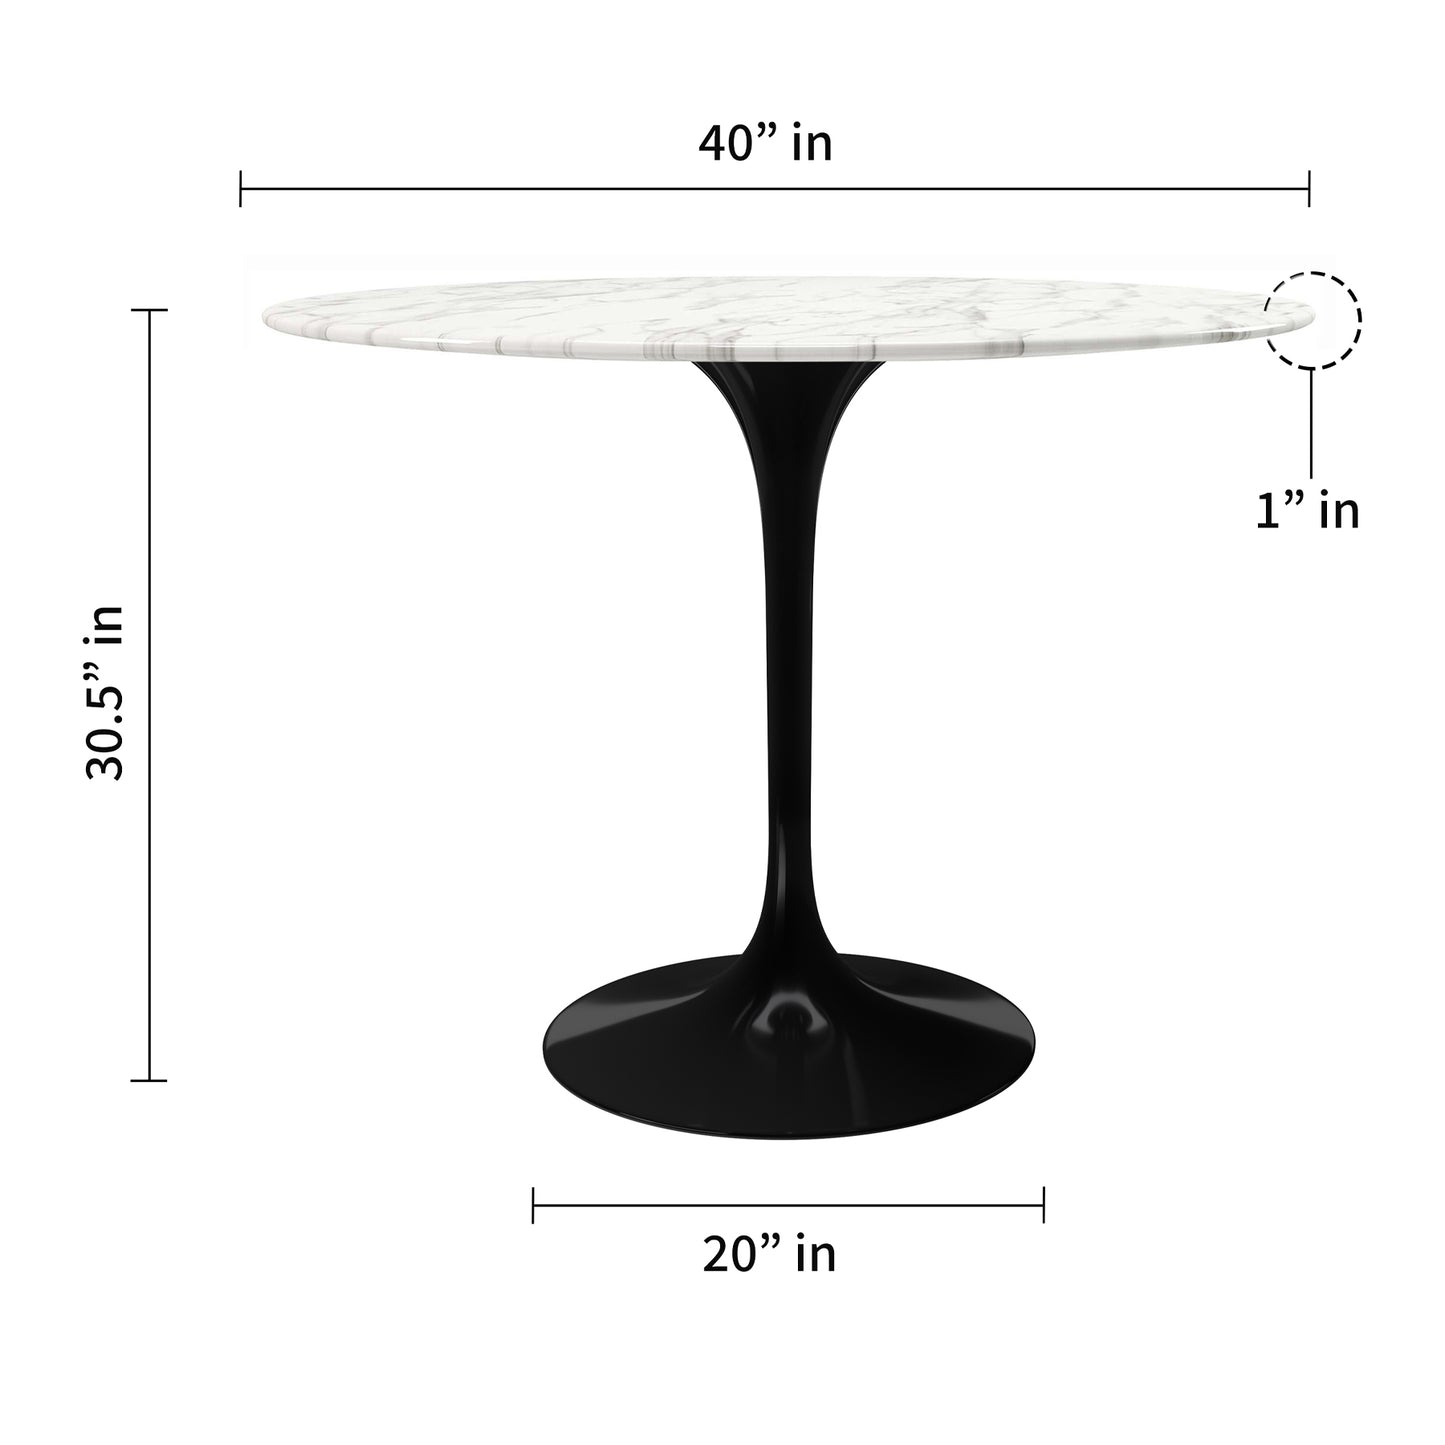 Rose 40" Round Marble Dining Table, Black Base